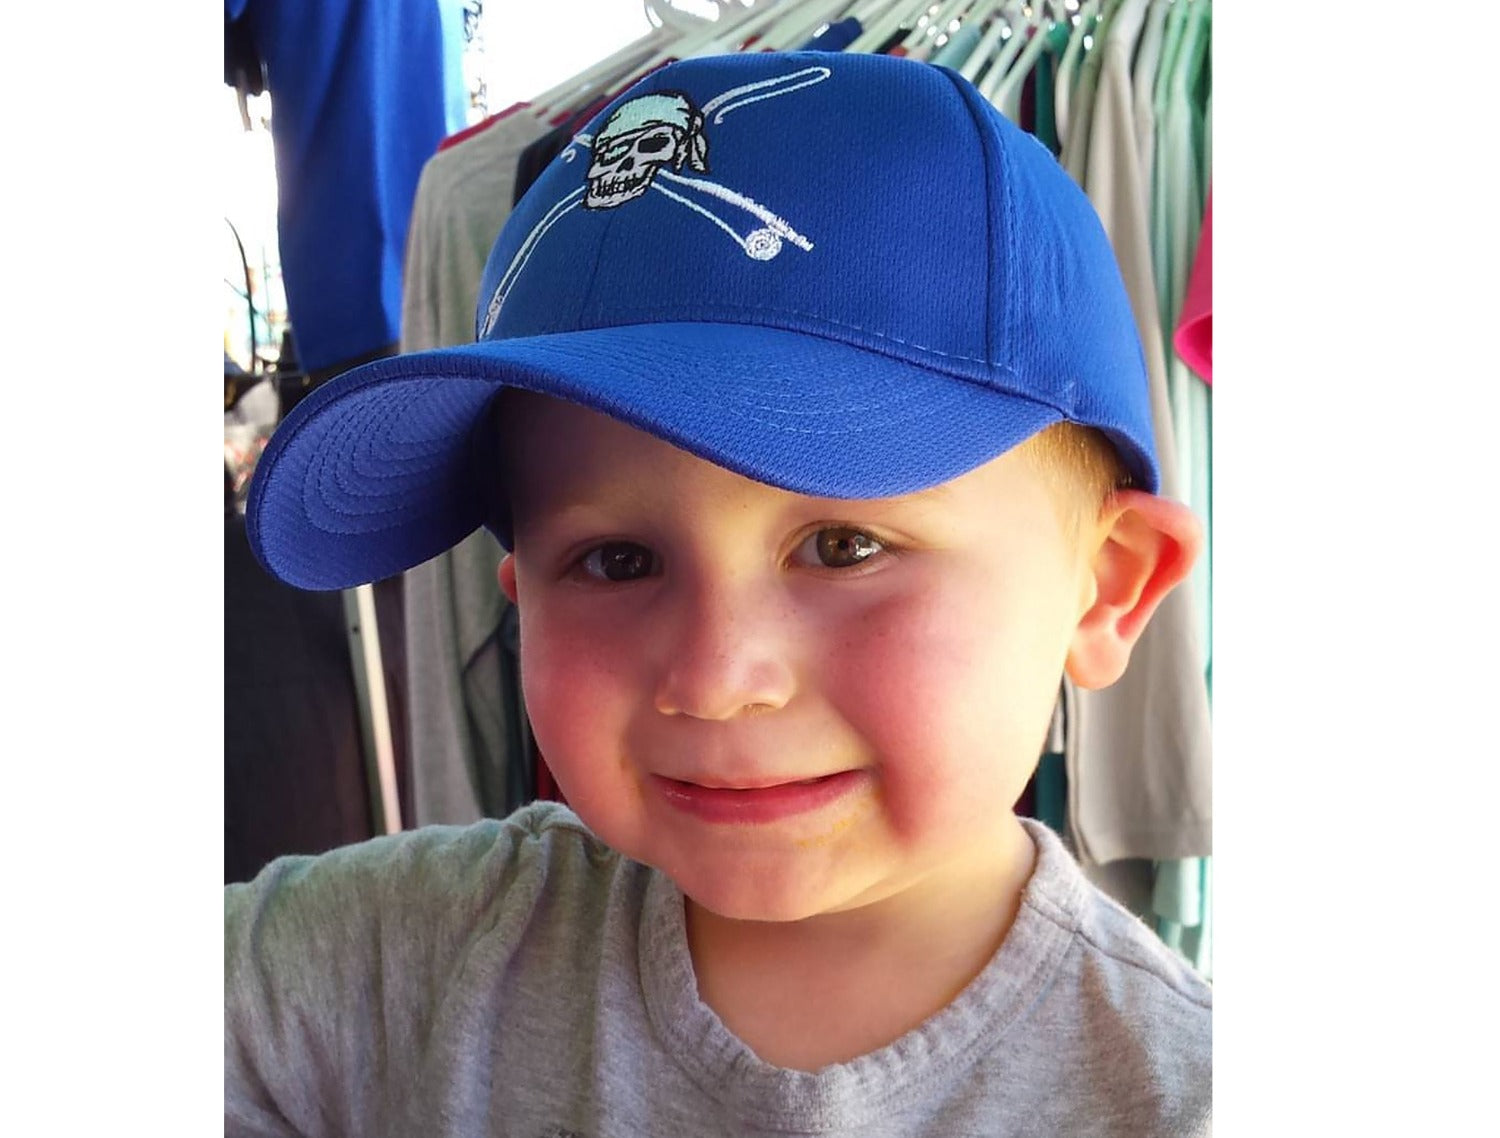 Youth Fishing Hats with Reel Fishy Pirate Skull & Rods Logo - Royal Blue